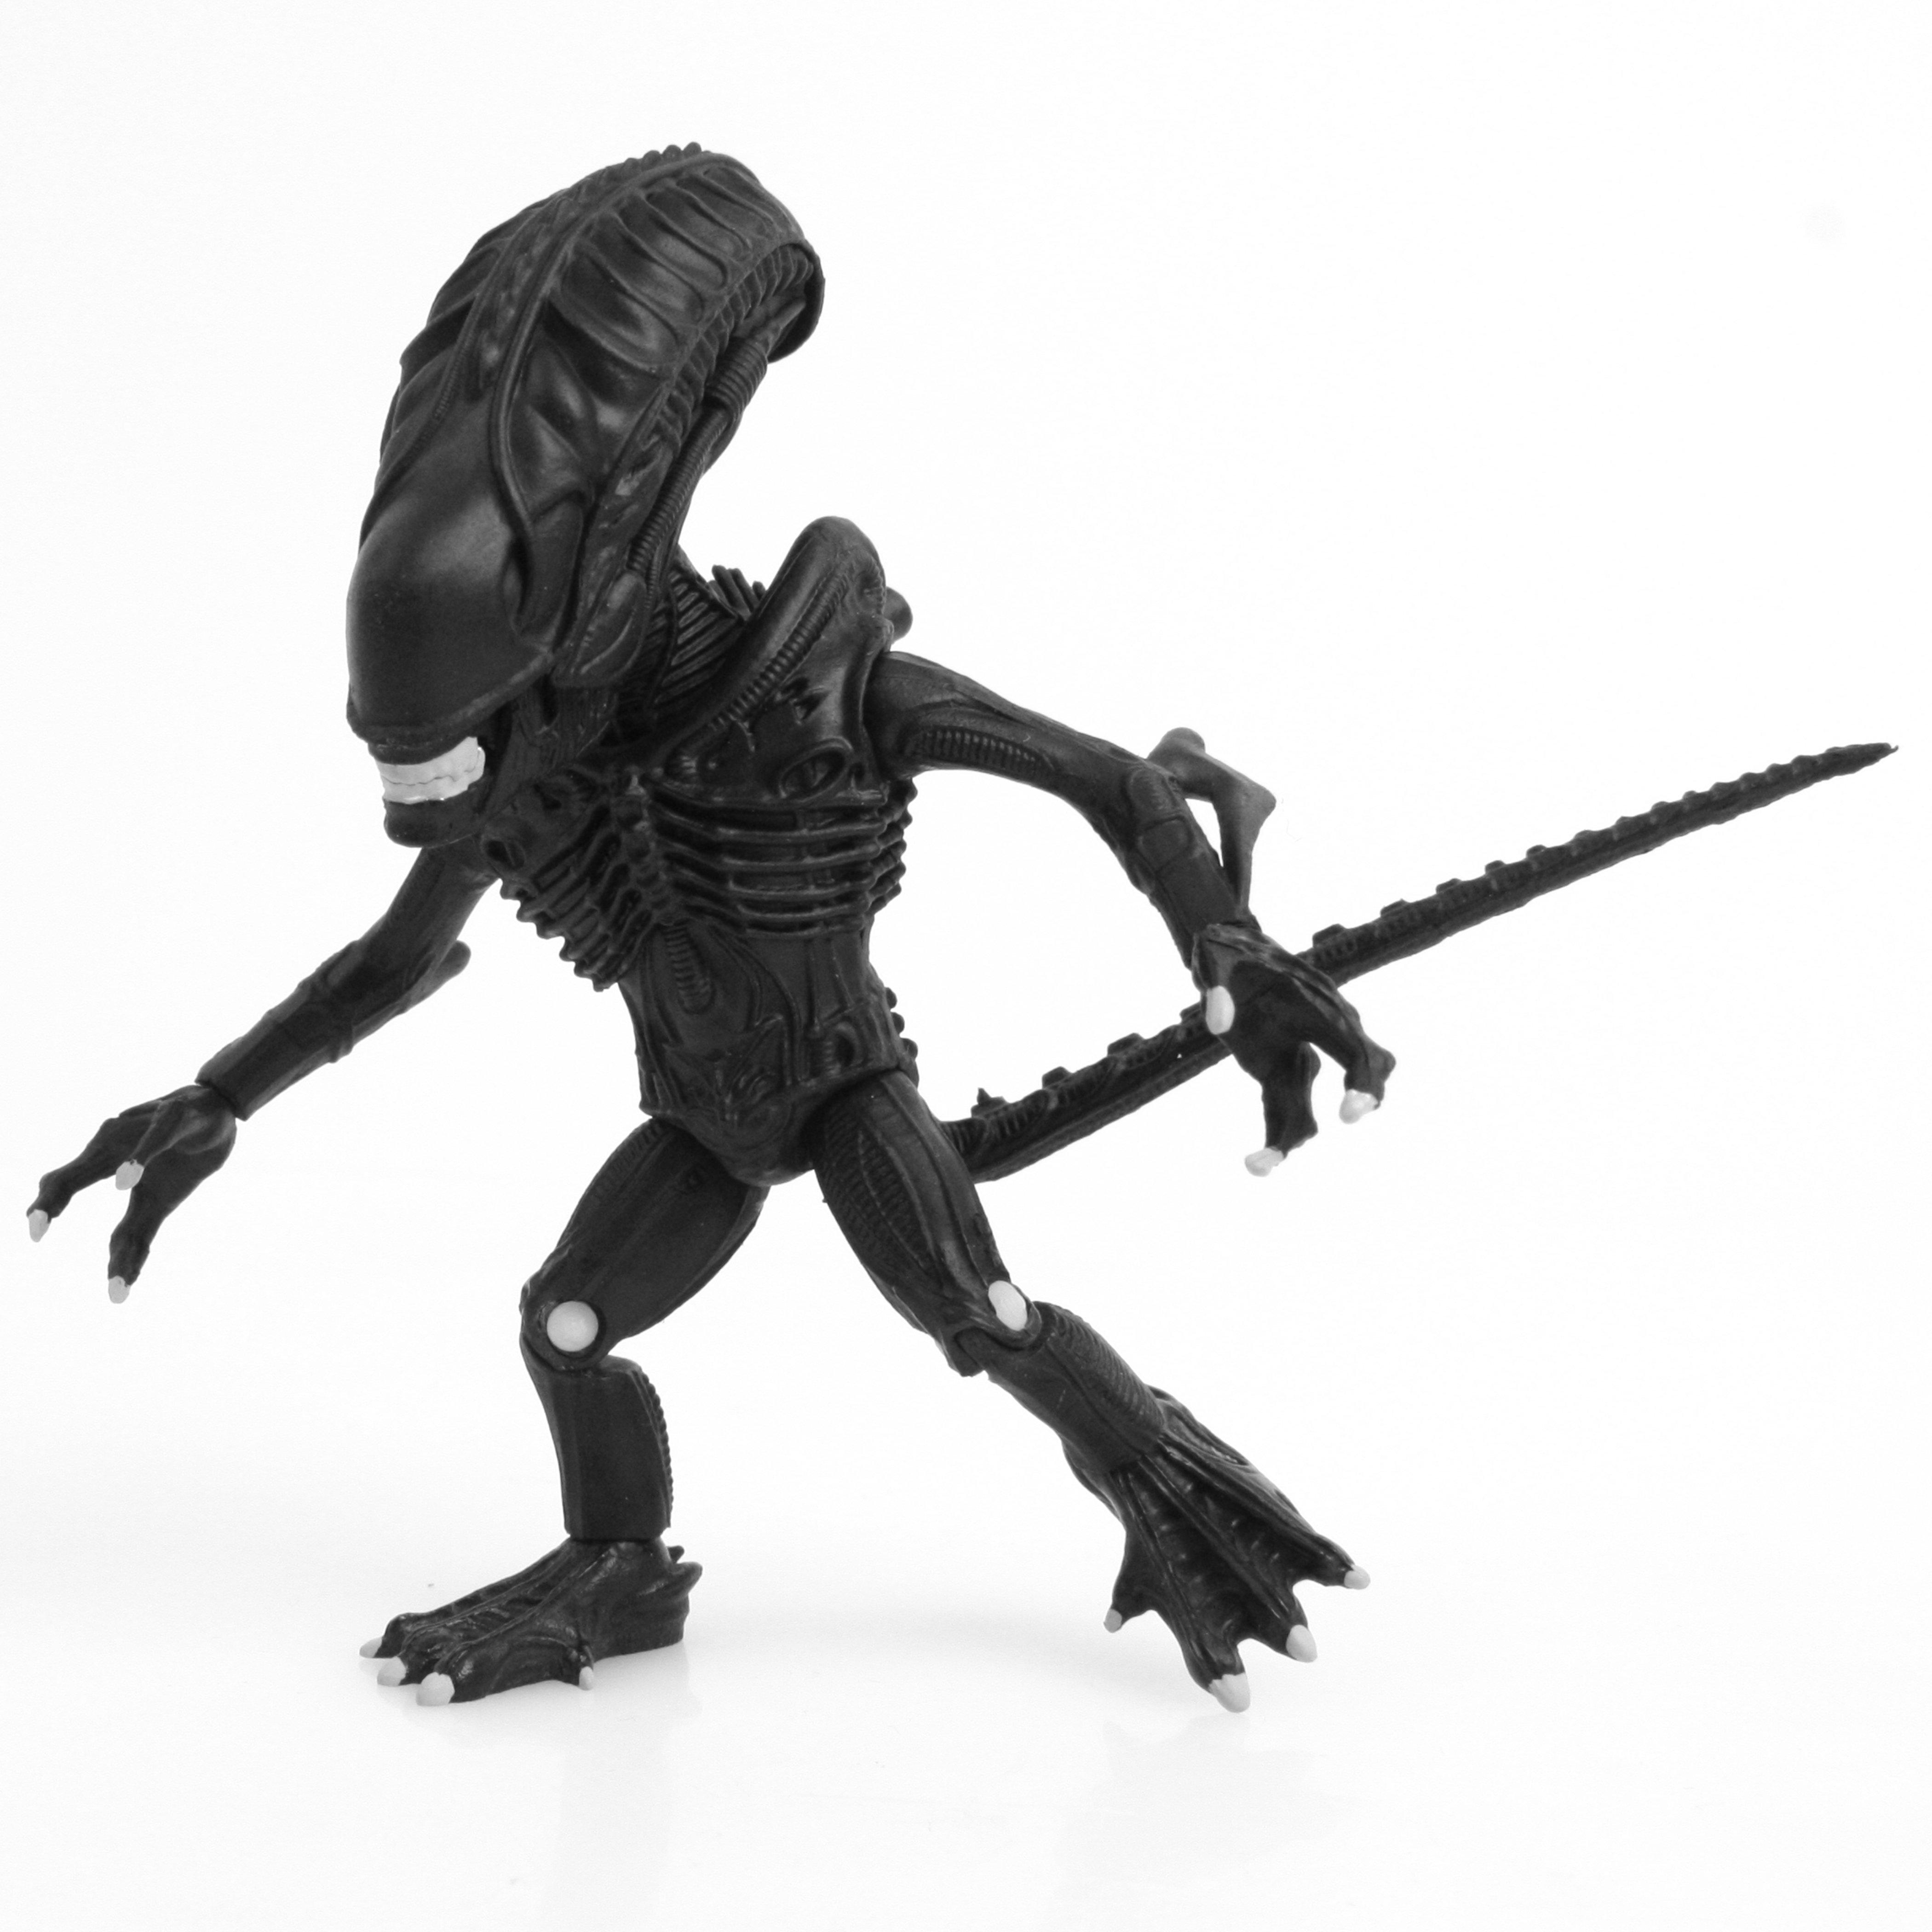 list item 9 of 11 Aliens The Loyal Subjects Action Figure (Assortment)